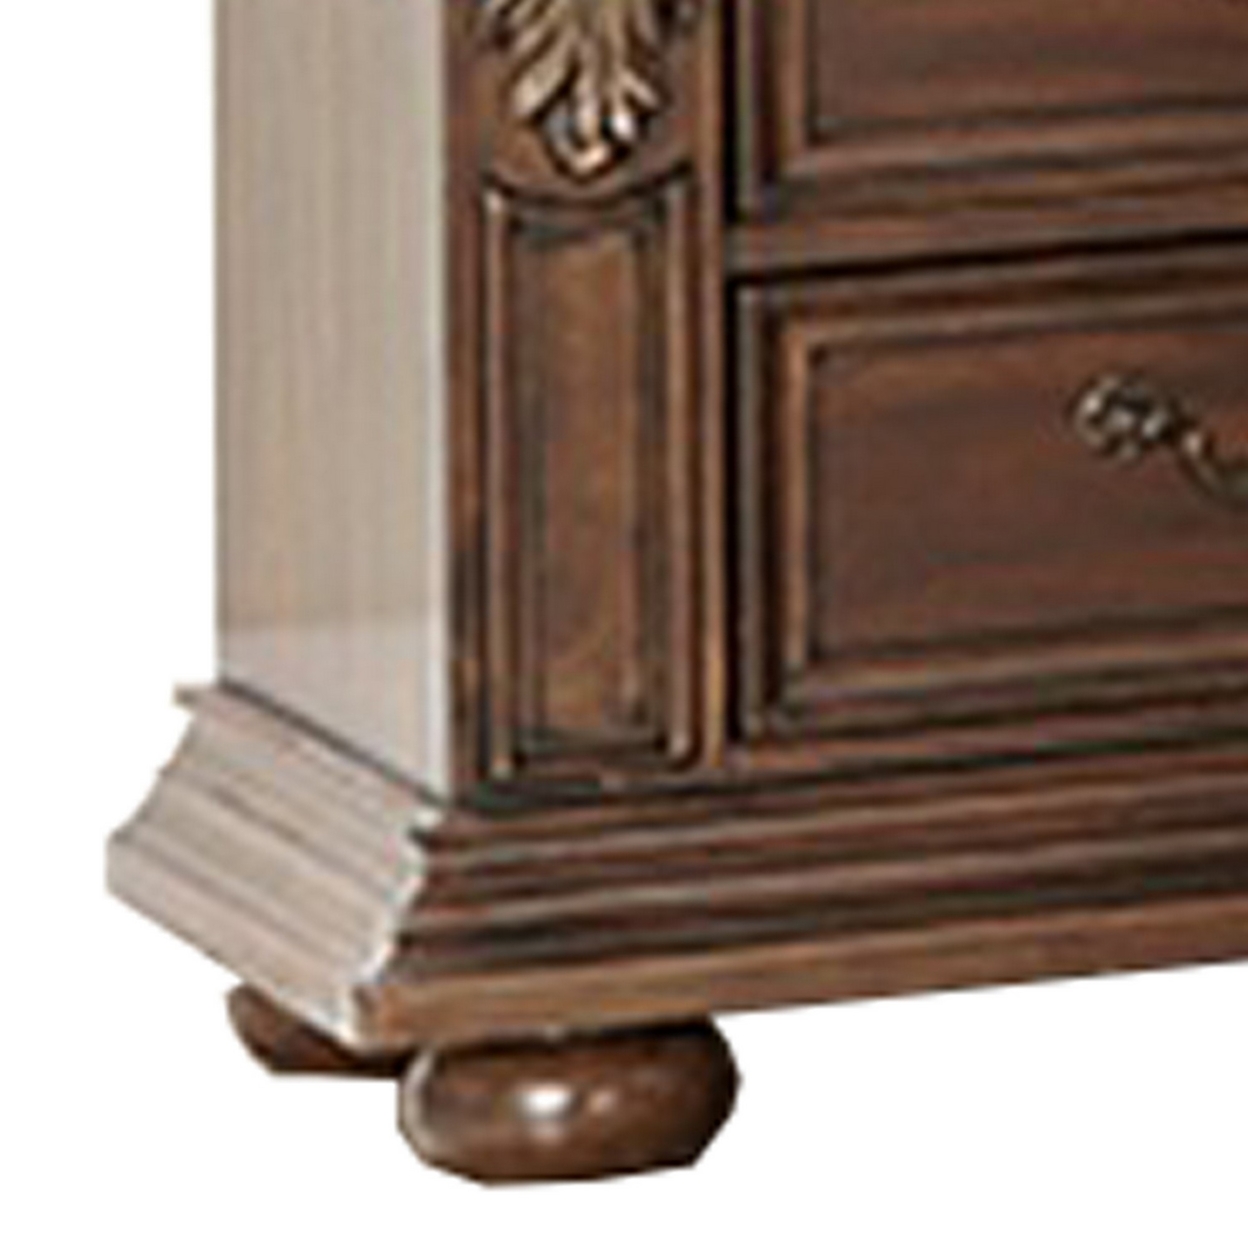 3 Drawer Wooden Nightstand With Molded And Carved Details, Brown- Saltoro Sherpi